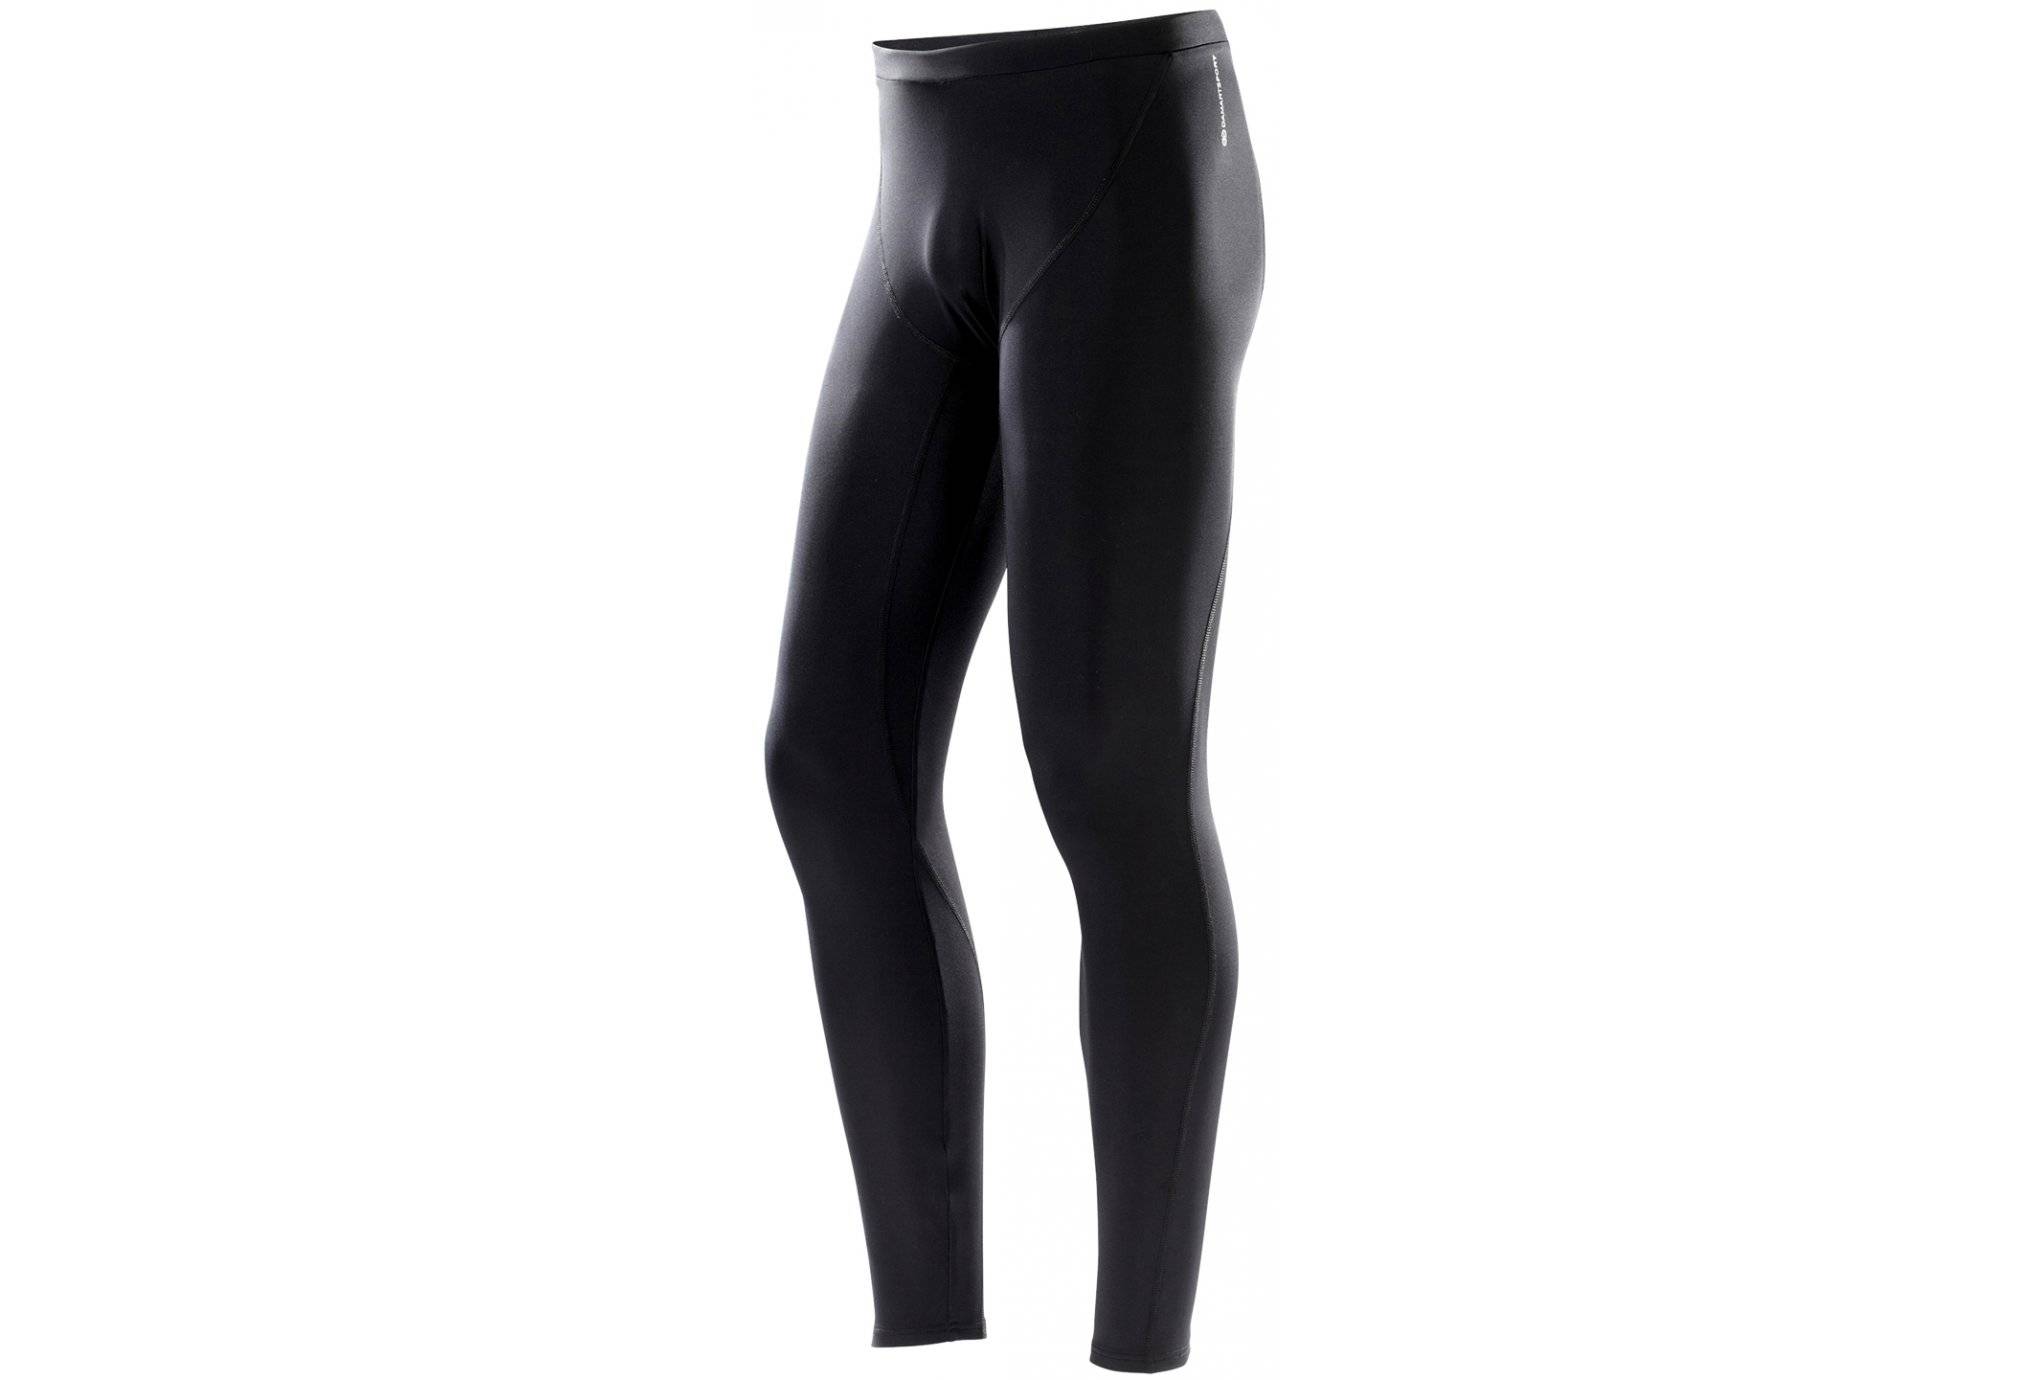 Collant thermolactyl Damart Sport Easybody 3 - Collant thermique femme hiver